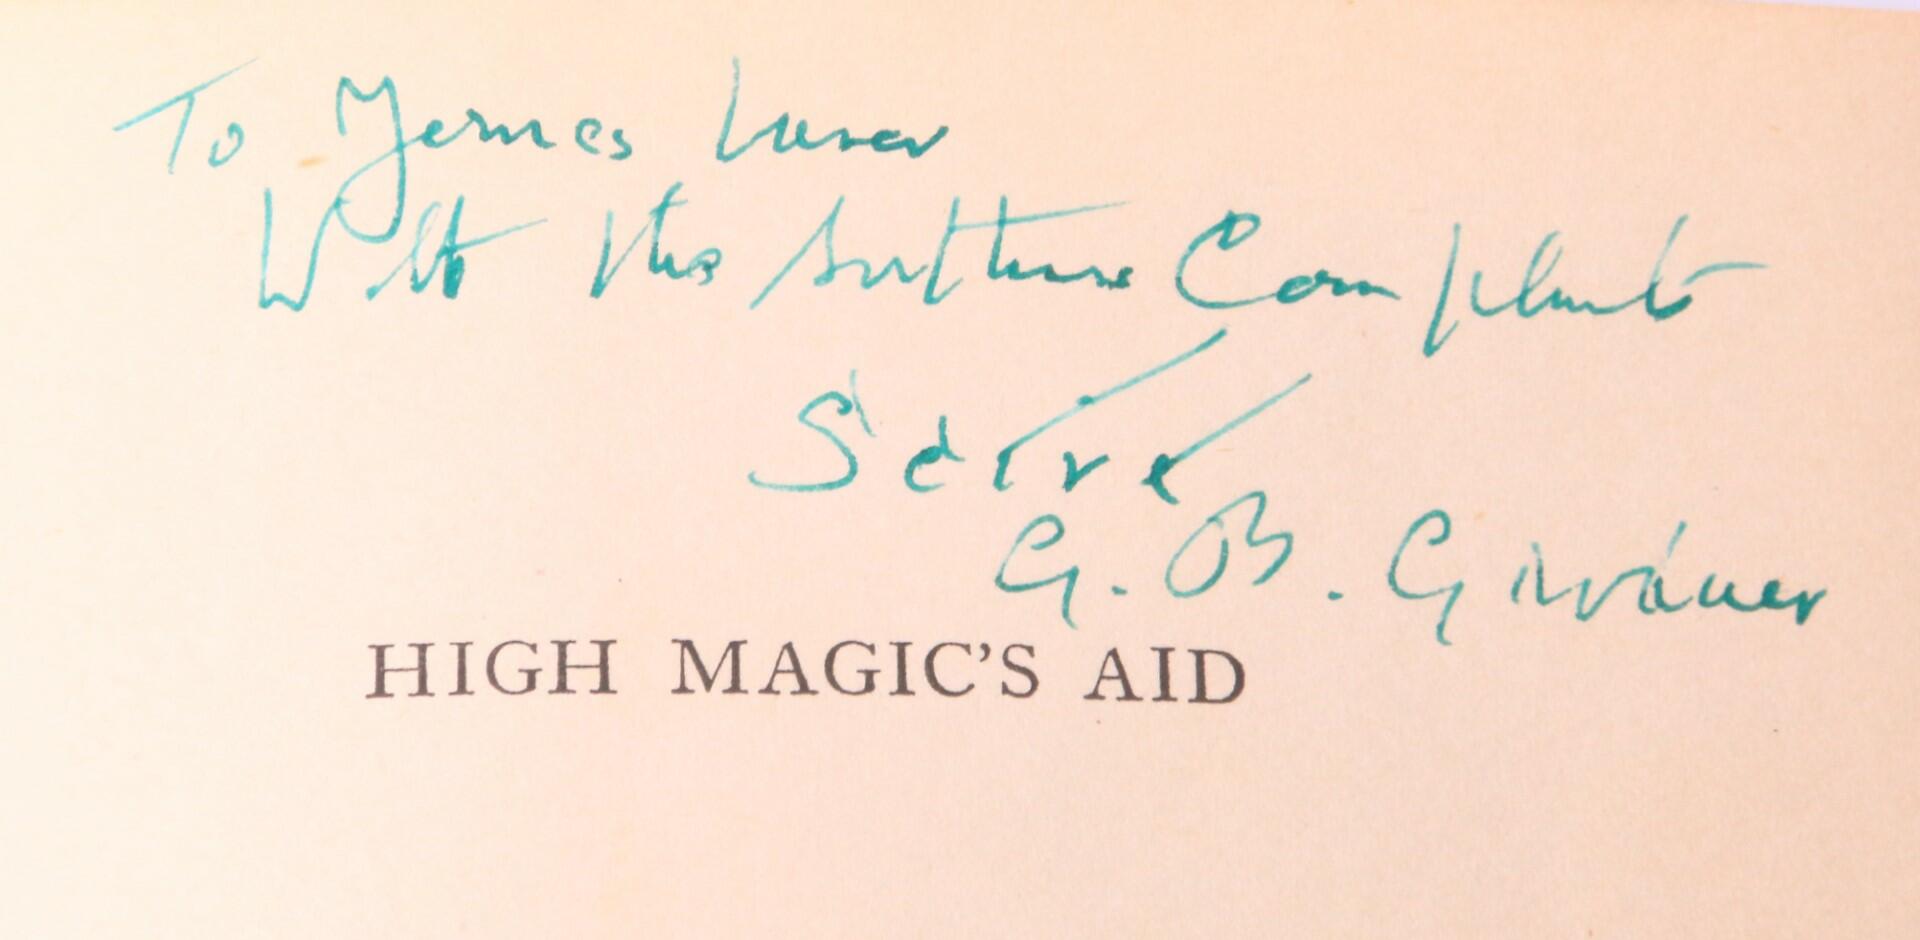 Scire [Gerald B. Gardner] - High Magic's Aid - Michael Houghton, 1949, Signed First Edition.